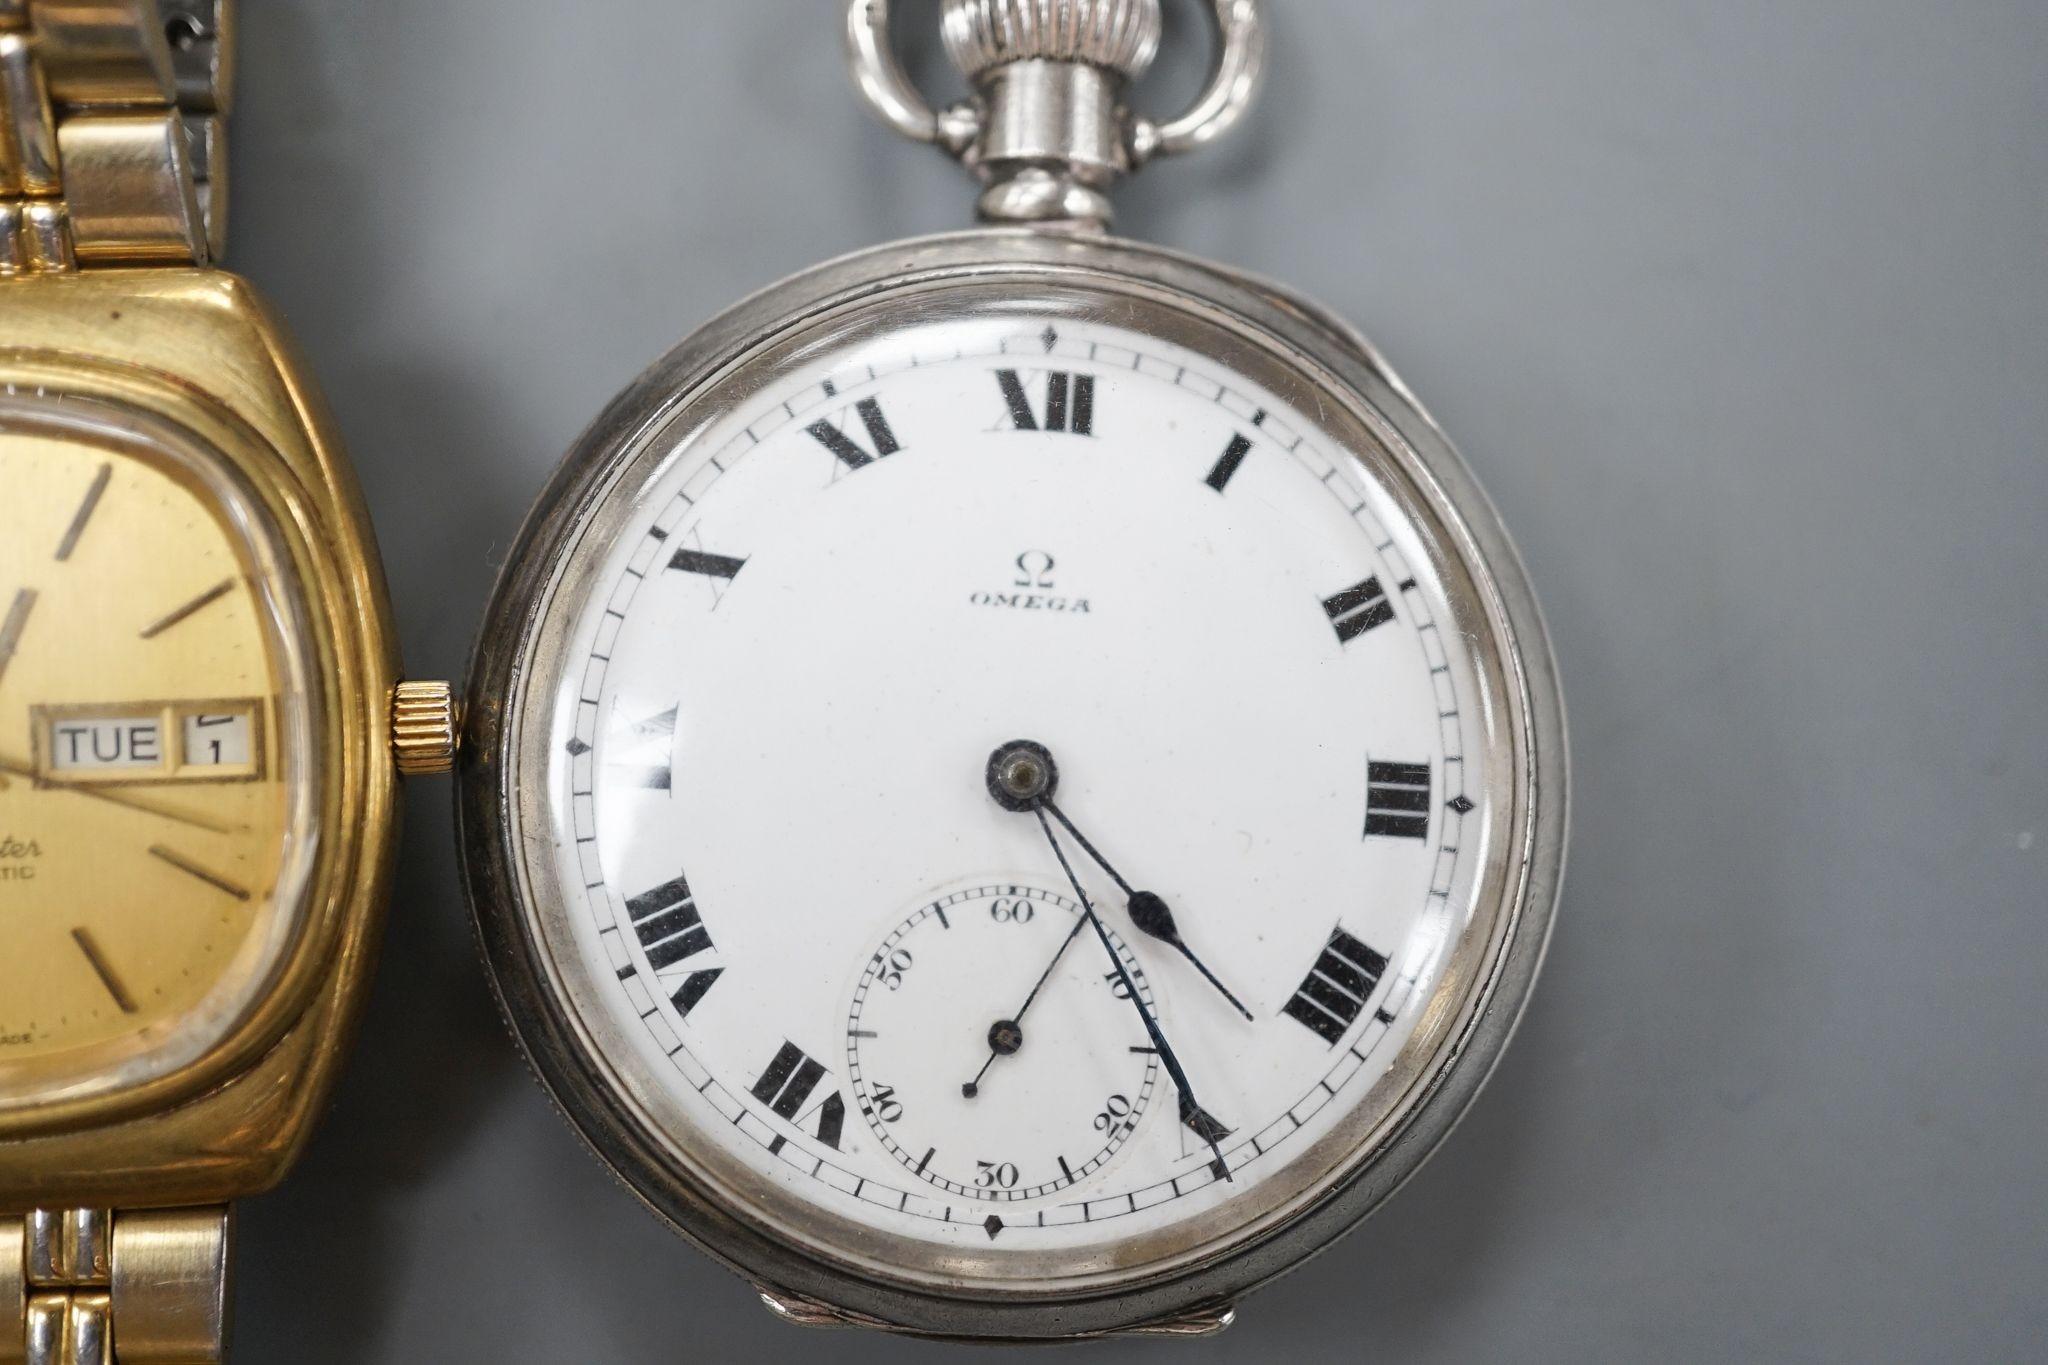 A George V silver Omega open face keyless pocket watch and a gold plated Omega Seamaster day/date automatic wrist watch.